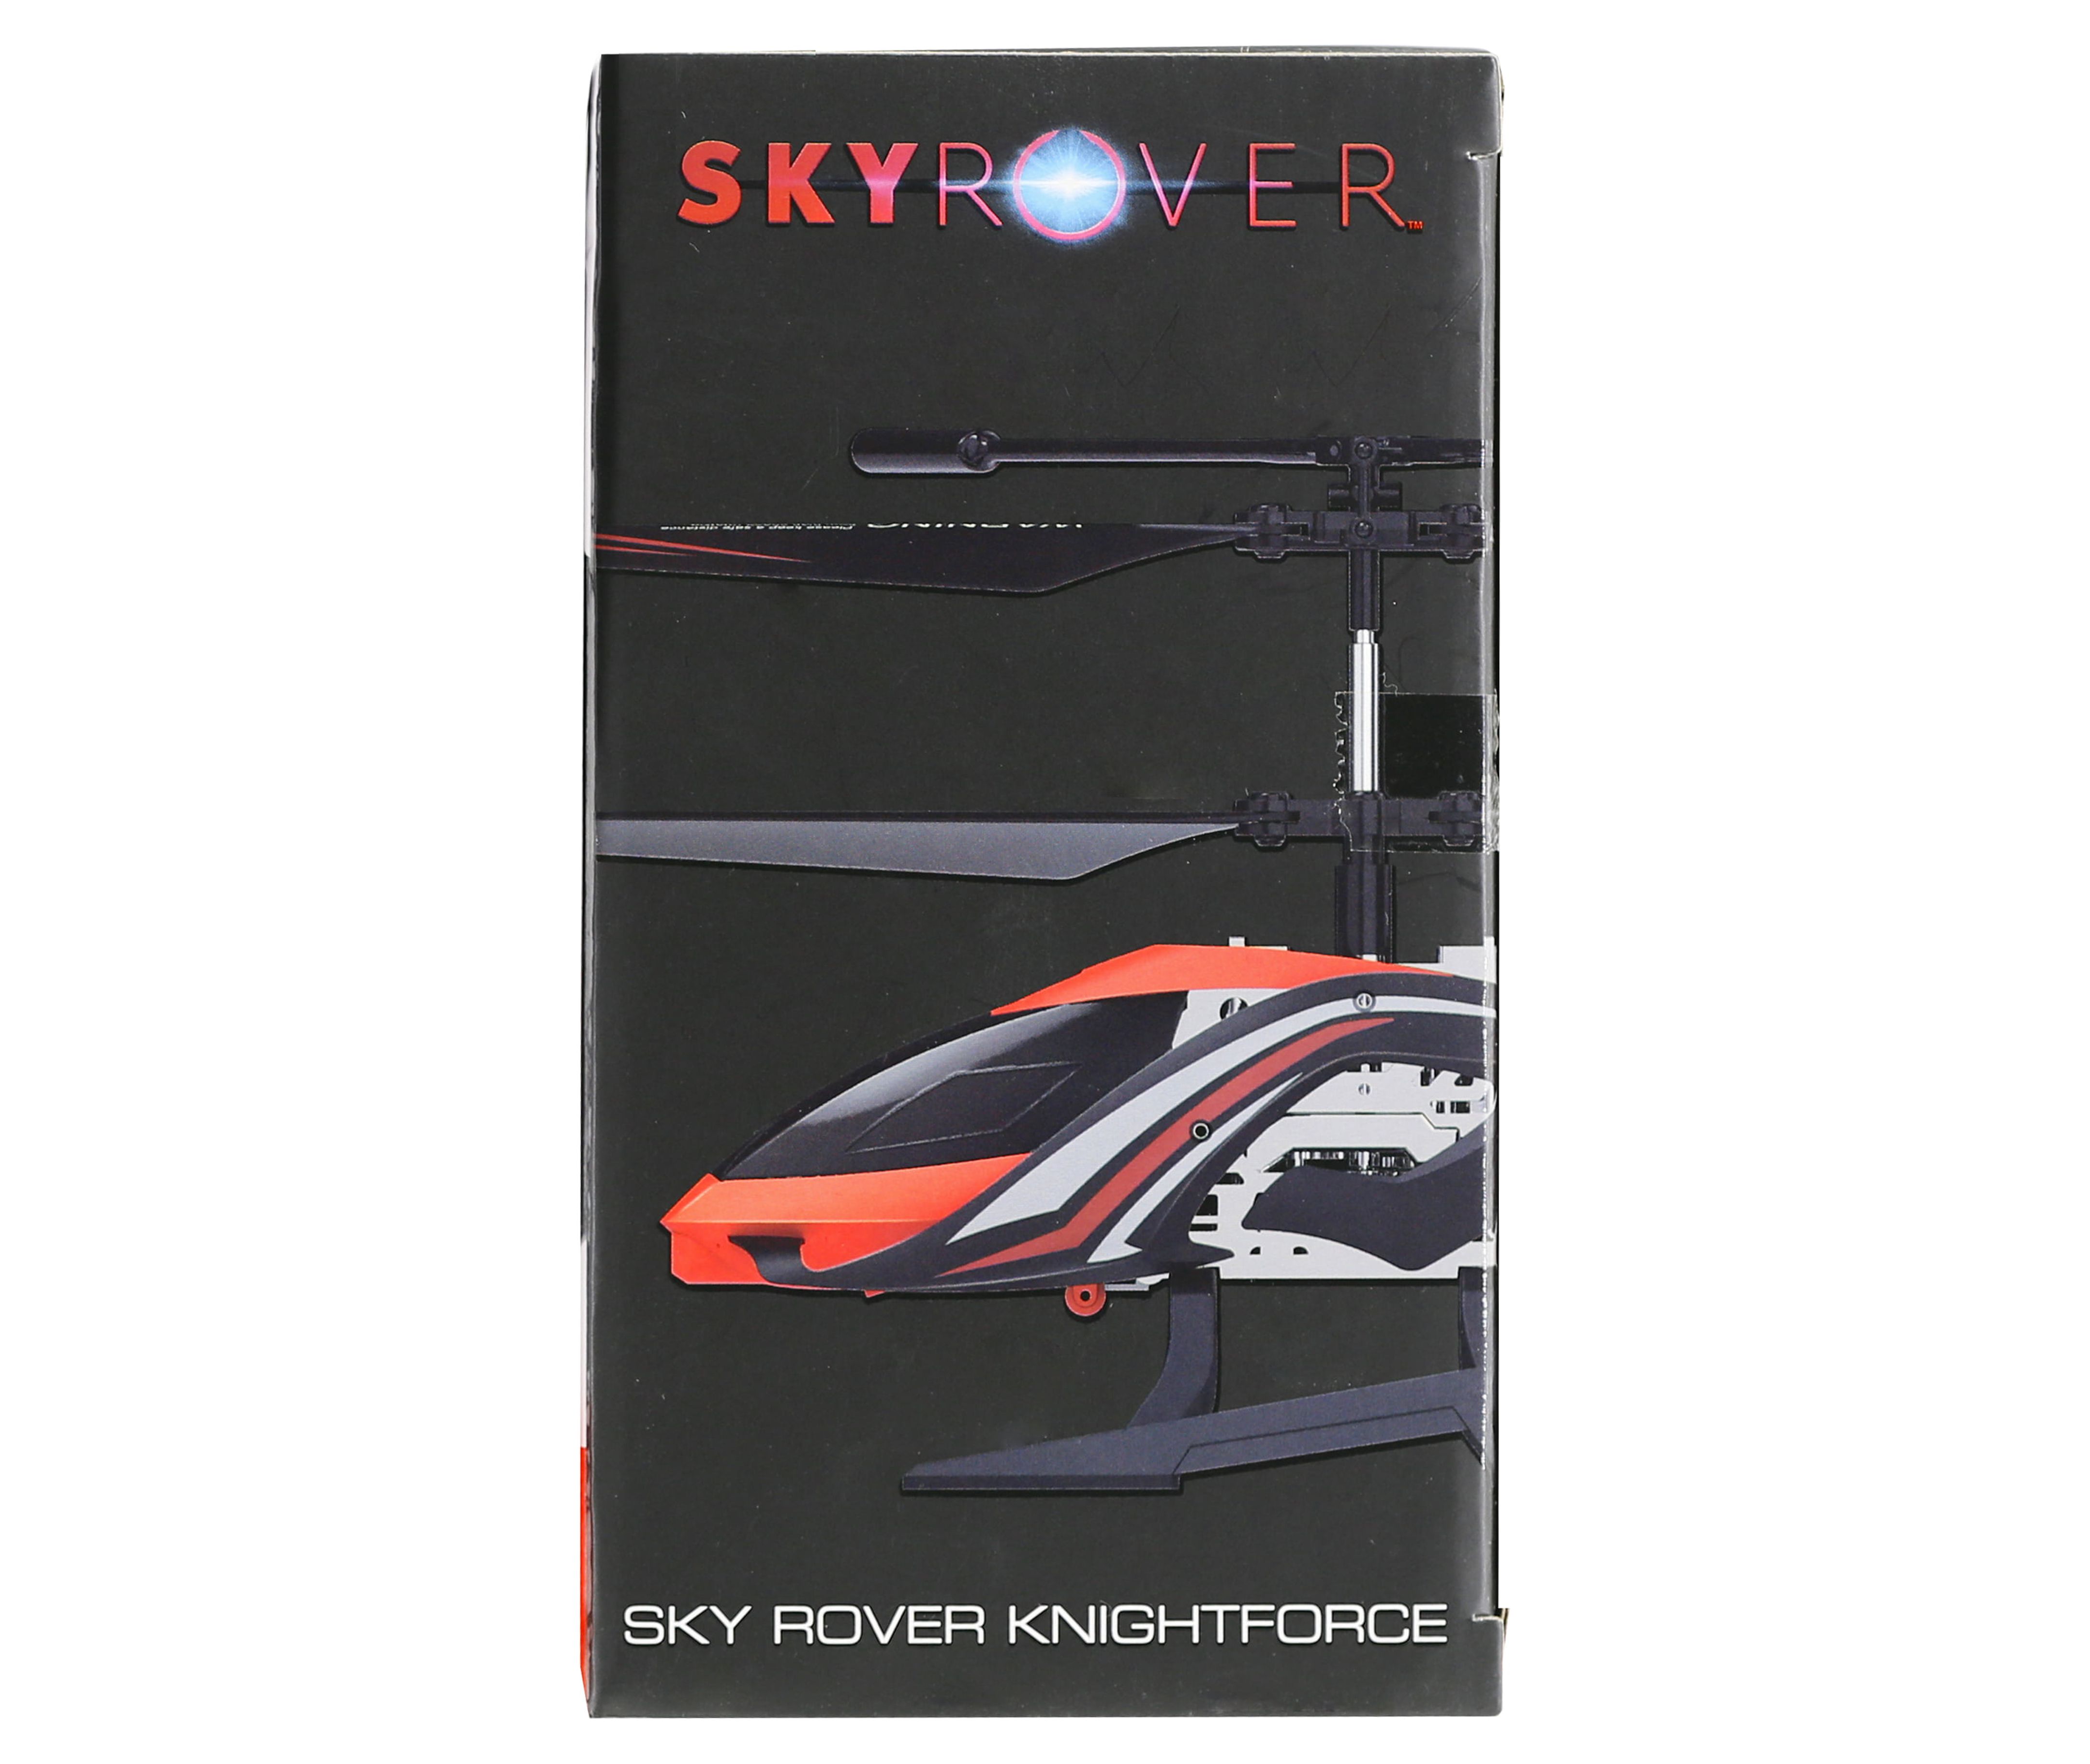 Sky Rover Knightforce in Red - image 4 of 9